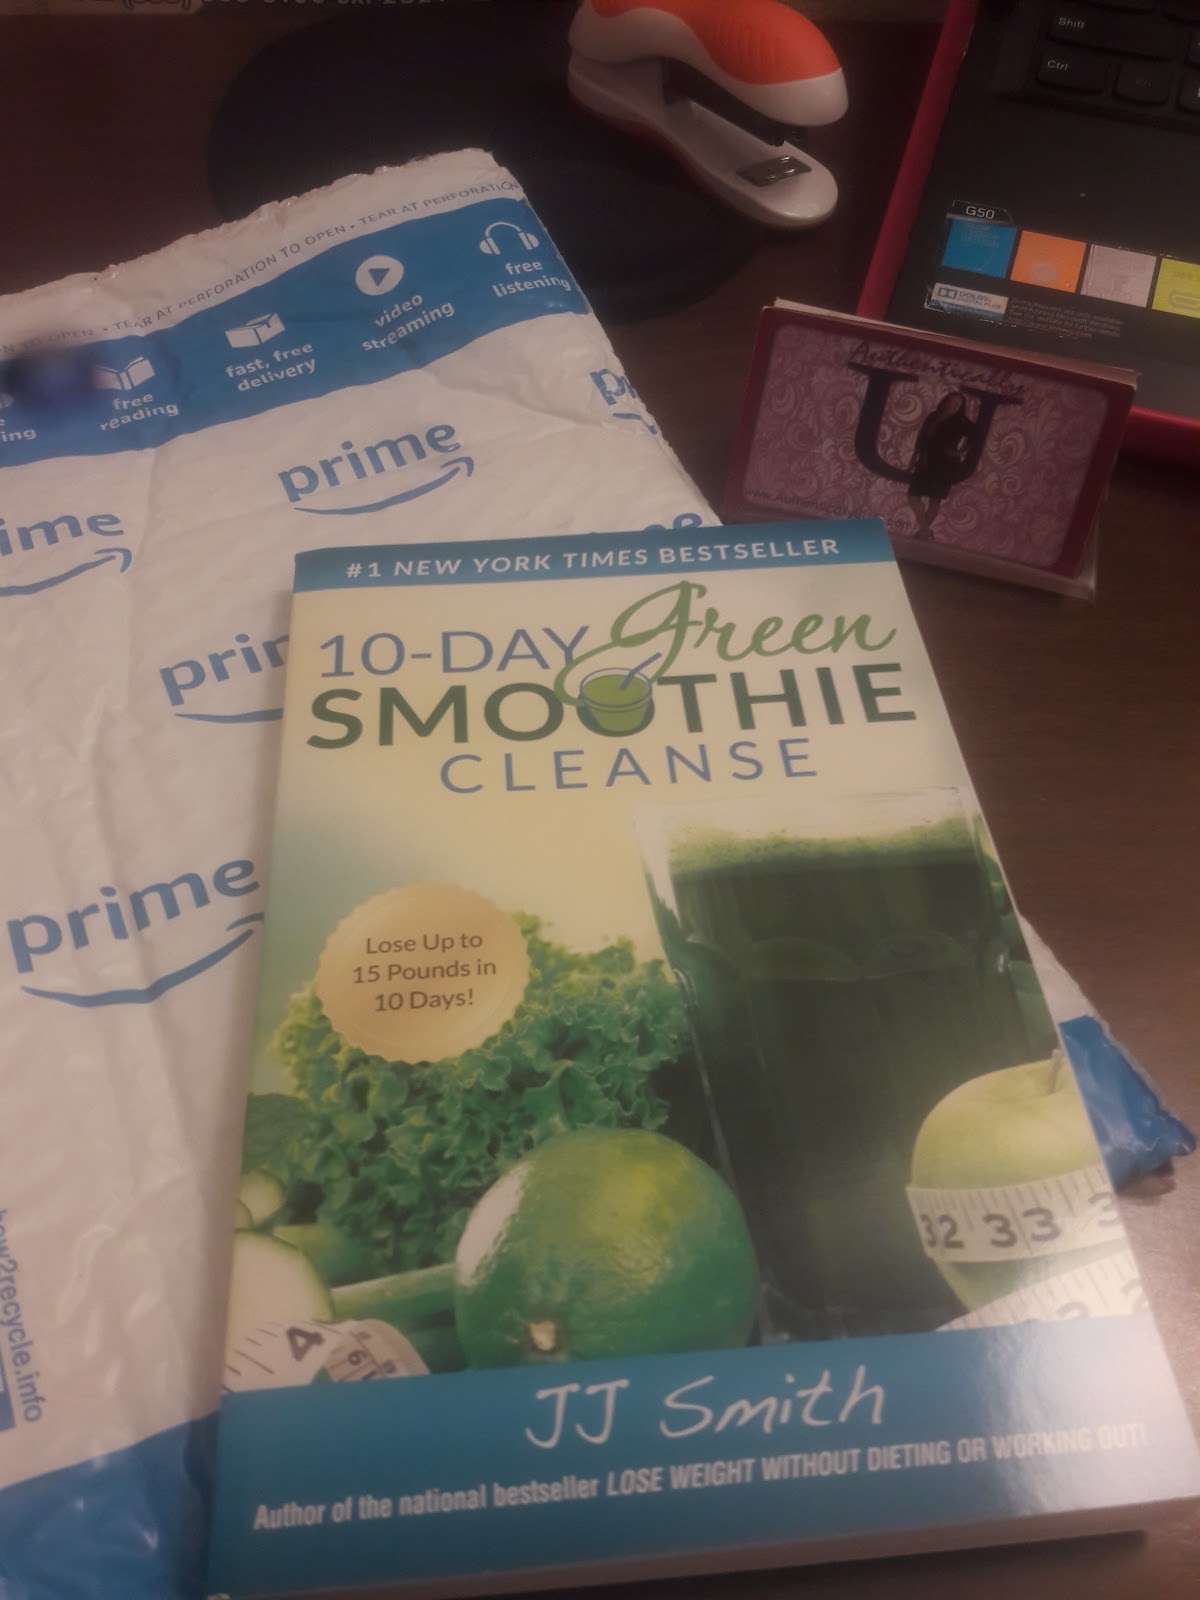 Tameka'S Corner: The Beginning Of My Journey: 10-Day Green Smoothie Cleanse  By Jj Smith